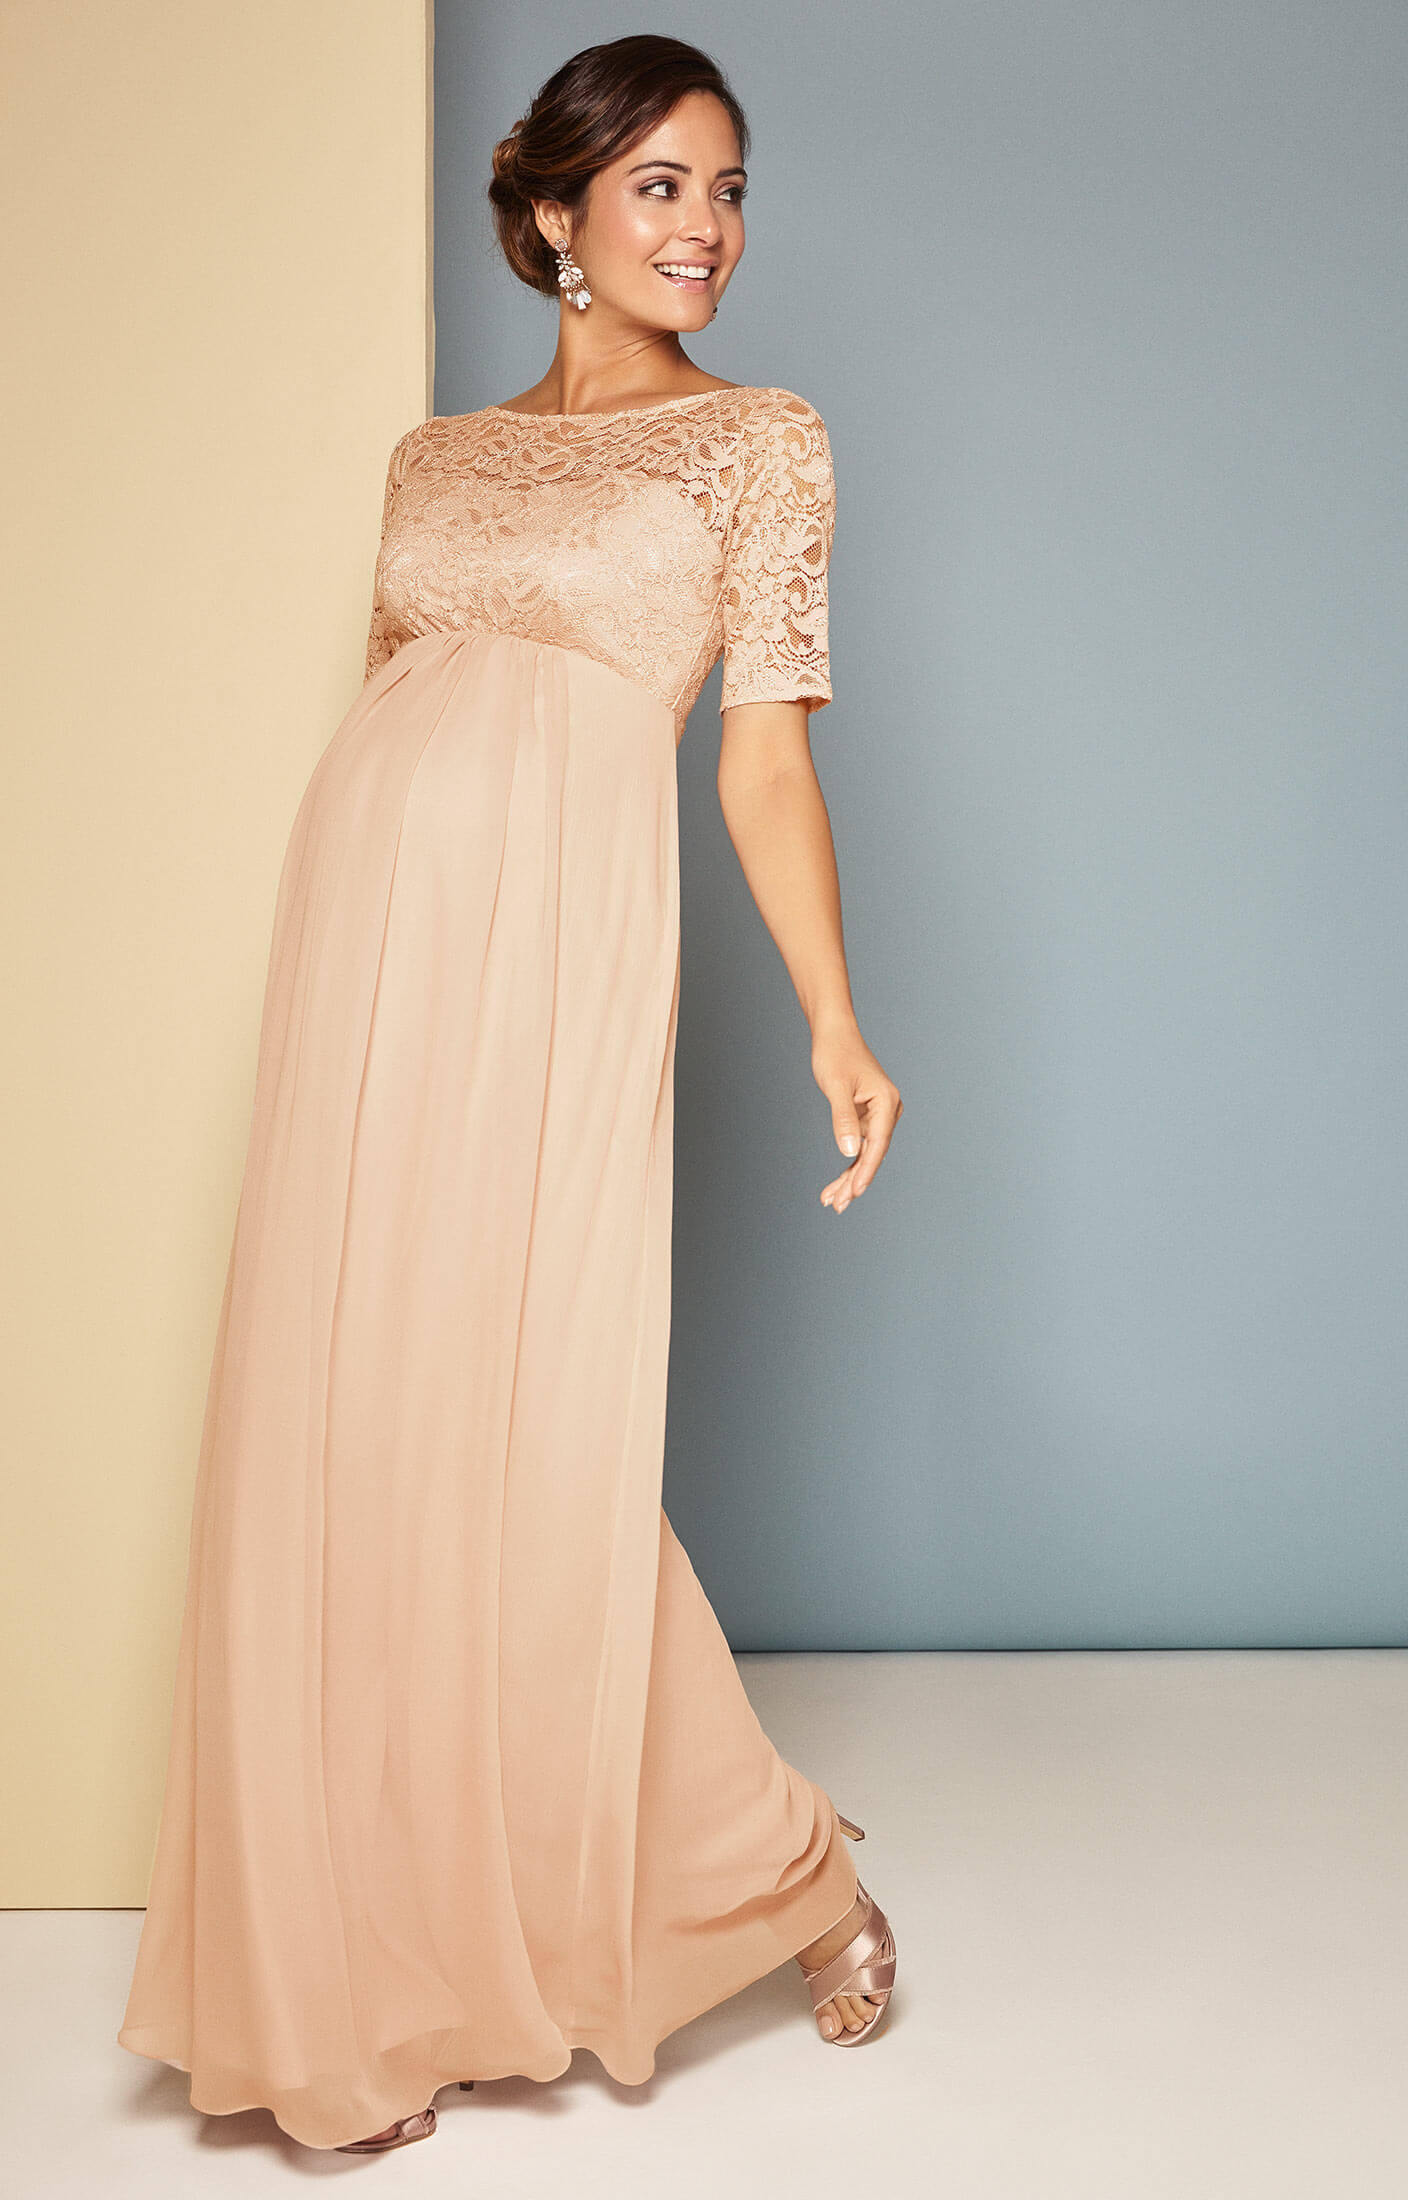 Alaska Maternity Chiffon Gown In Peach Blush Maternity Wedding Dresses Evening Wear And Party 